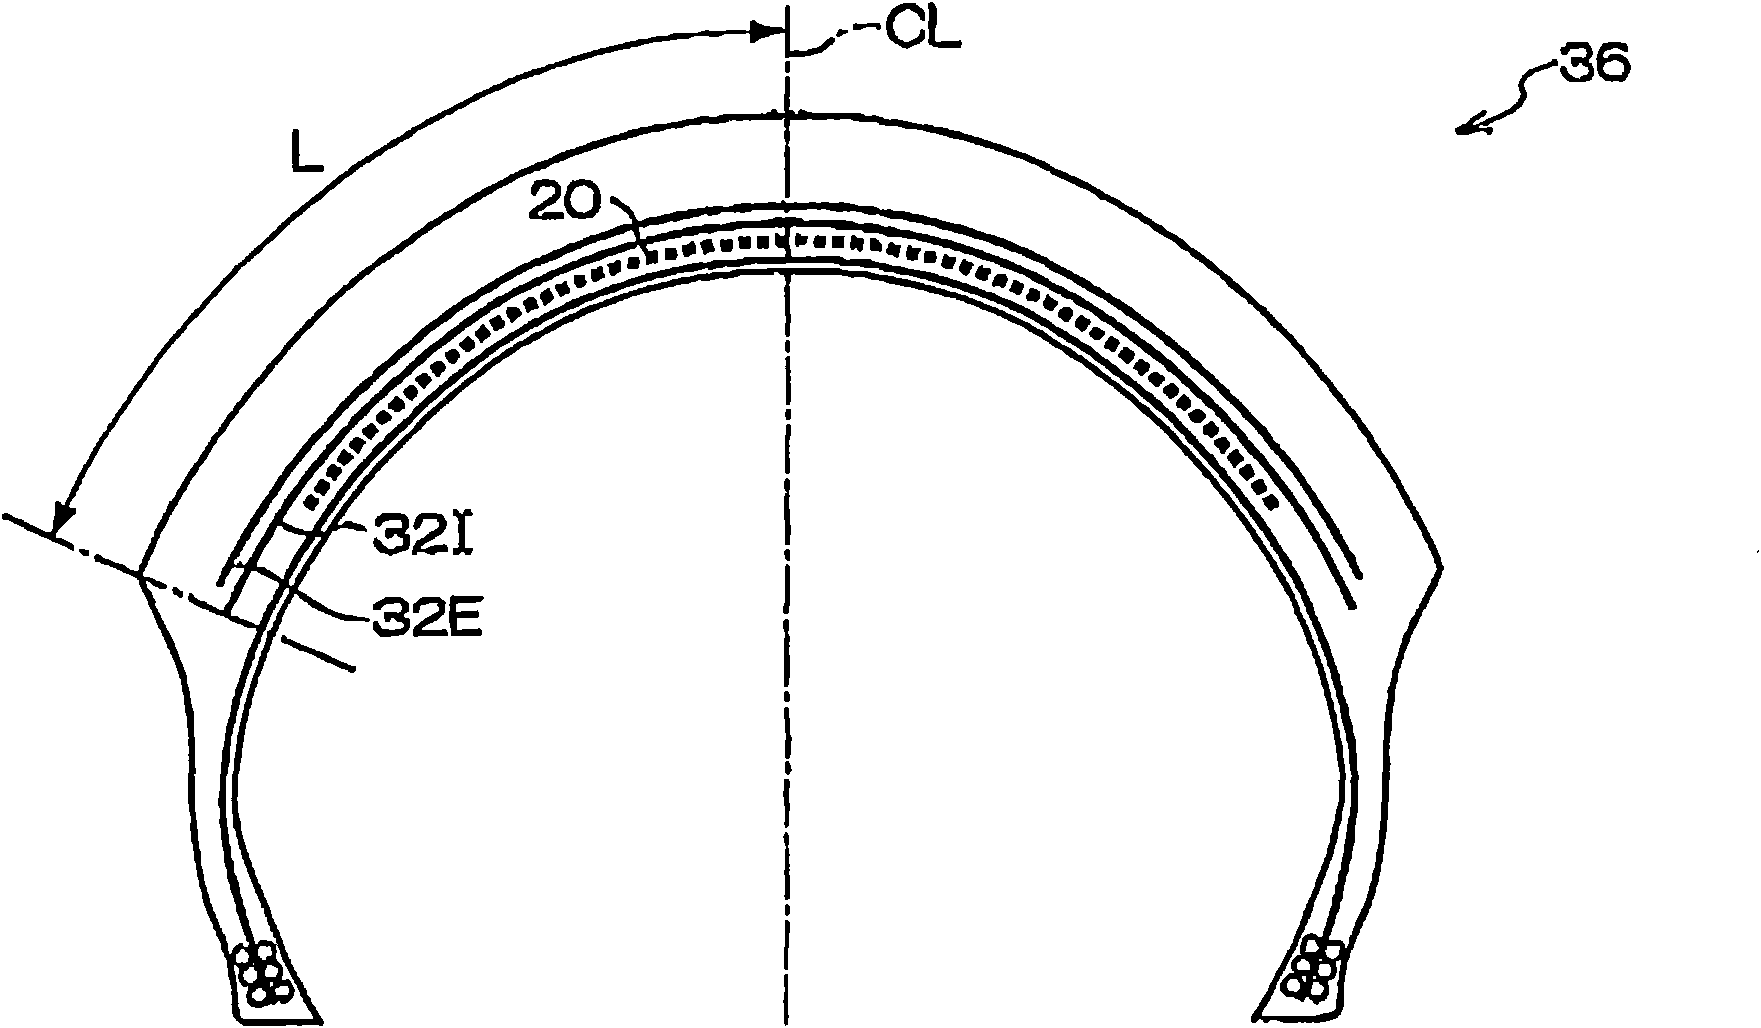 Pneumatic tire for two-wheeled vehicle